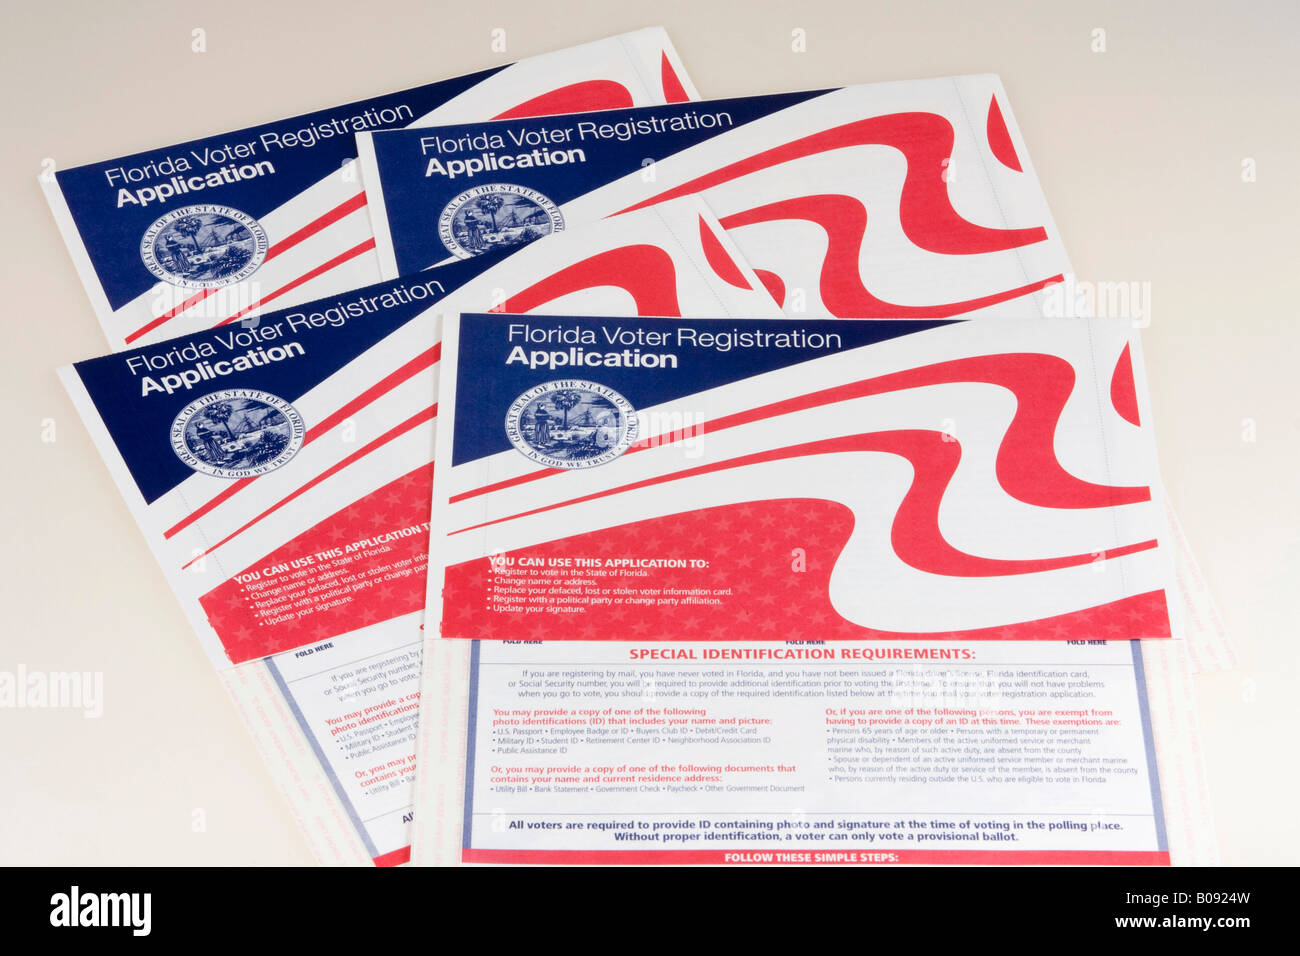 Voter registration cards, application form for elections, Florida, USA Stock Photo